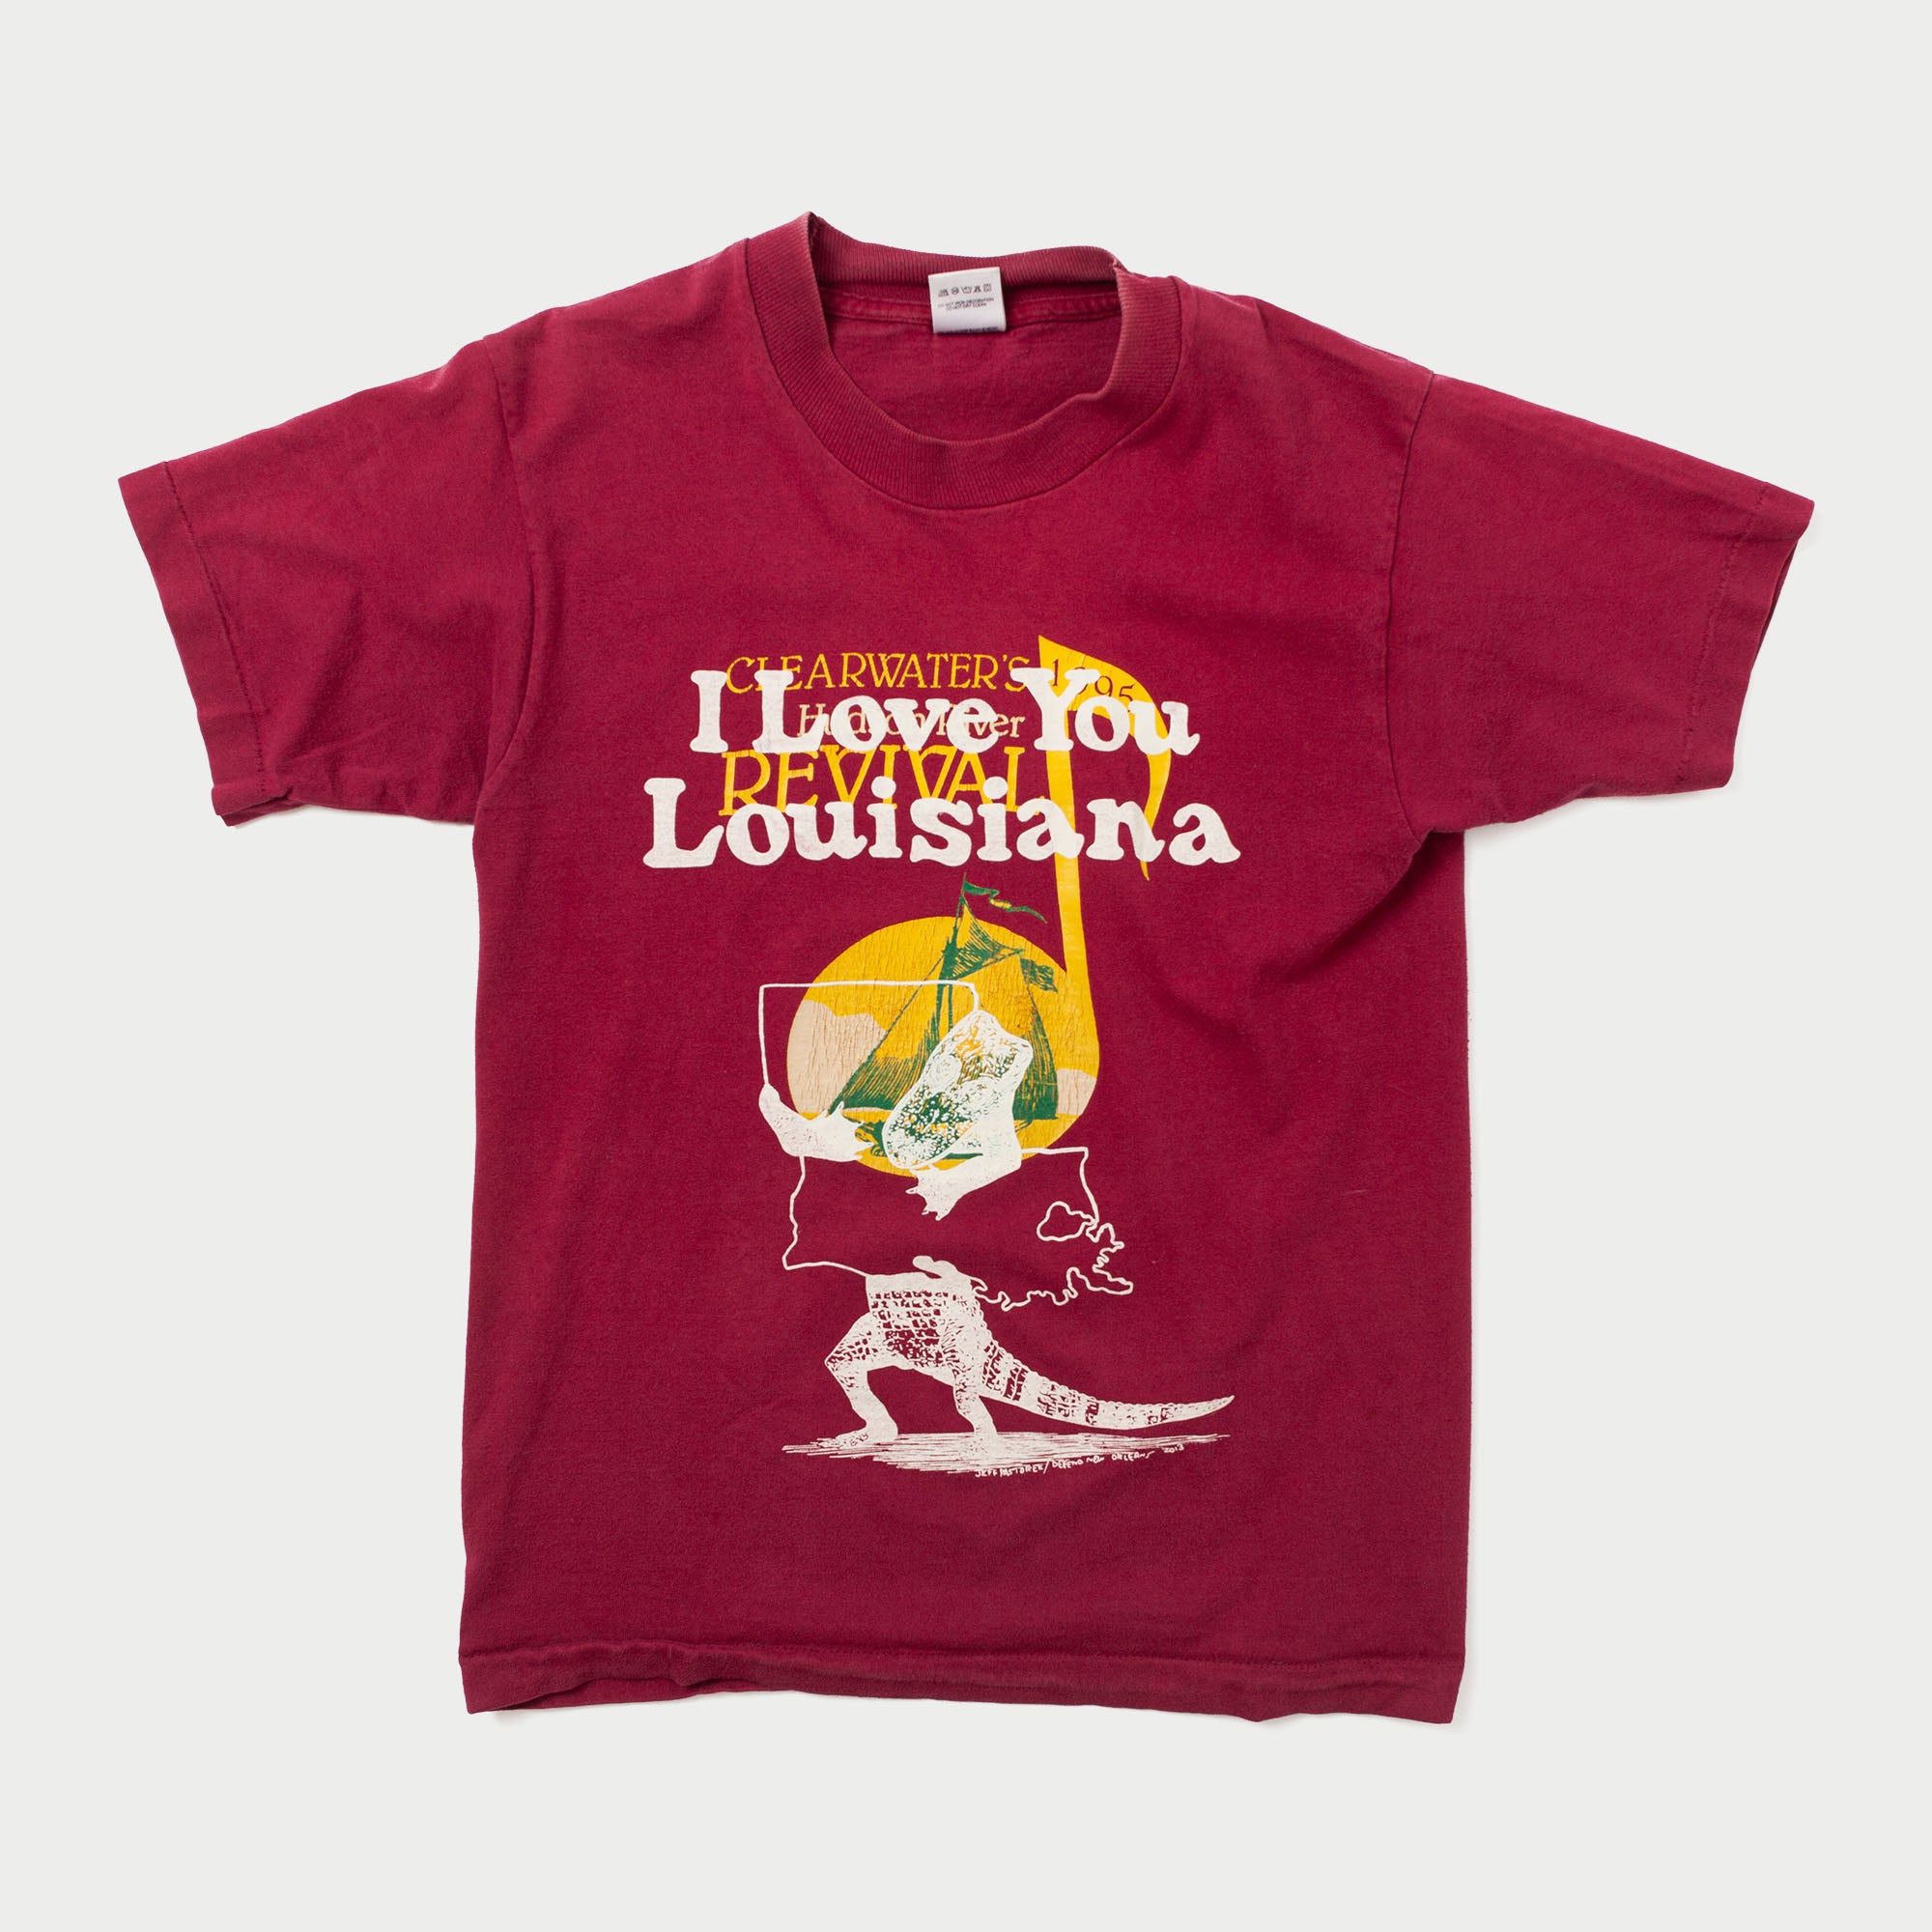 I Love You Louisiana Clearwater 1995   Vintage